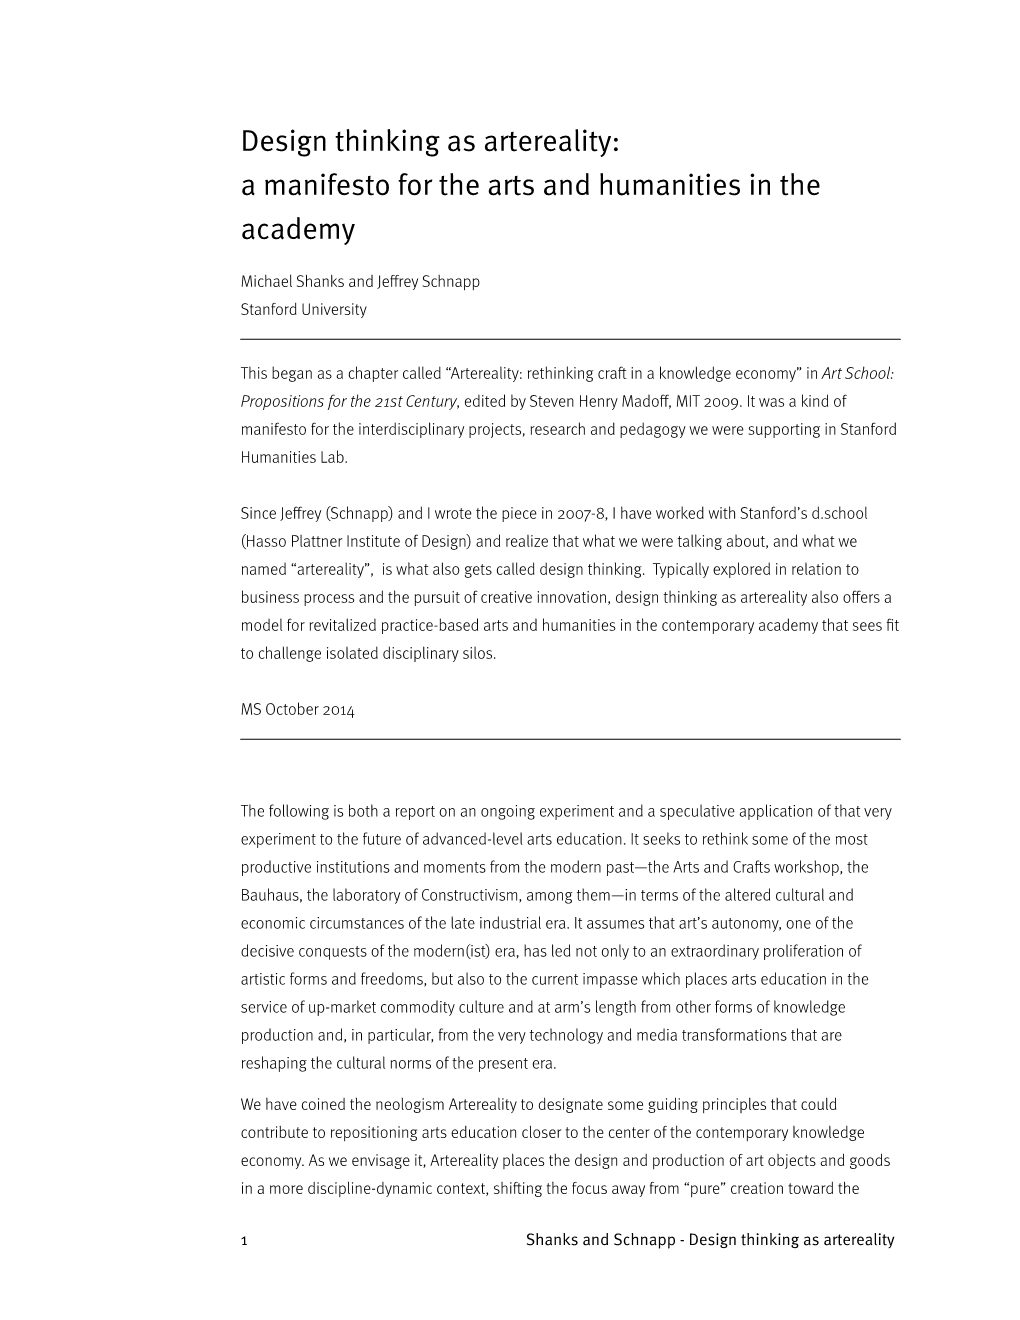 Design Thinking- a View from the Arts and Humanities in the Academy.Pages